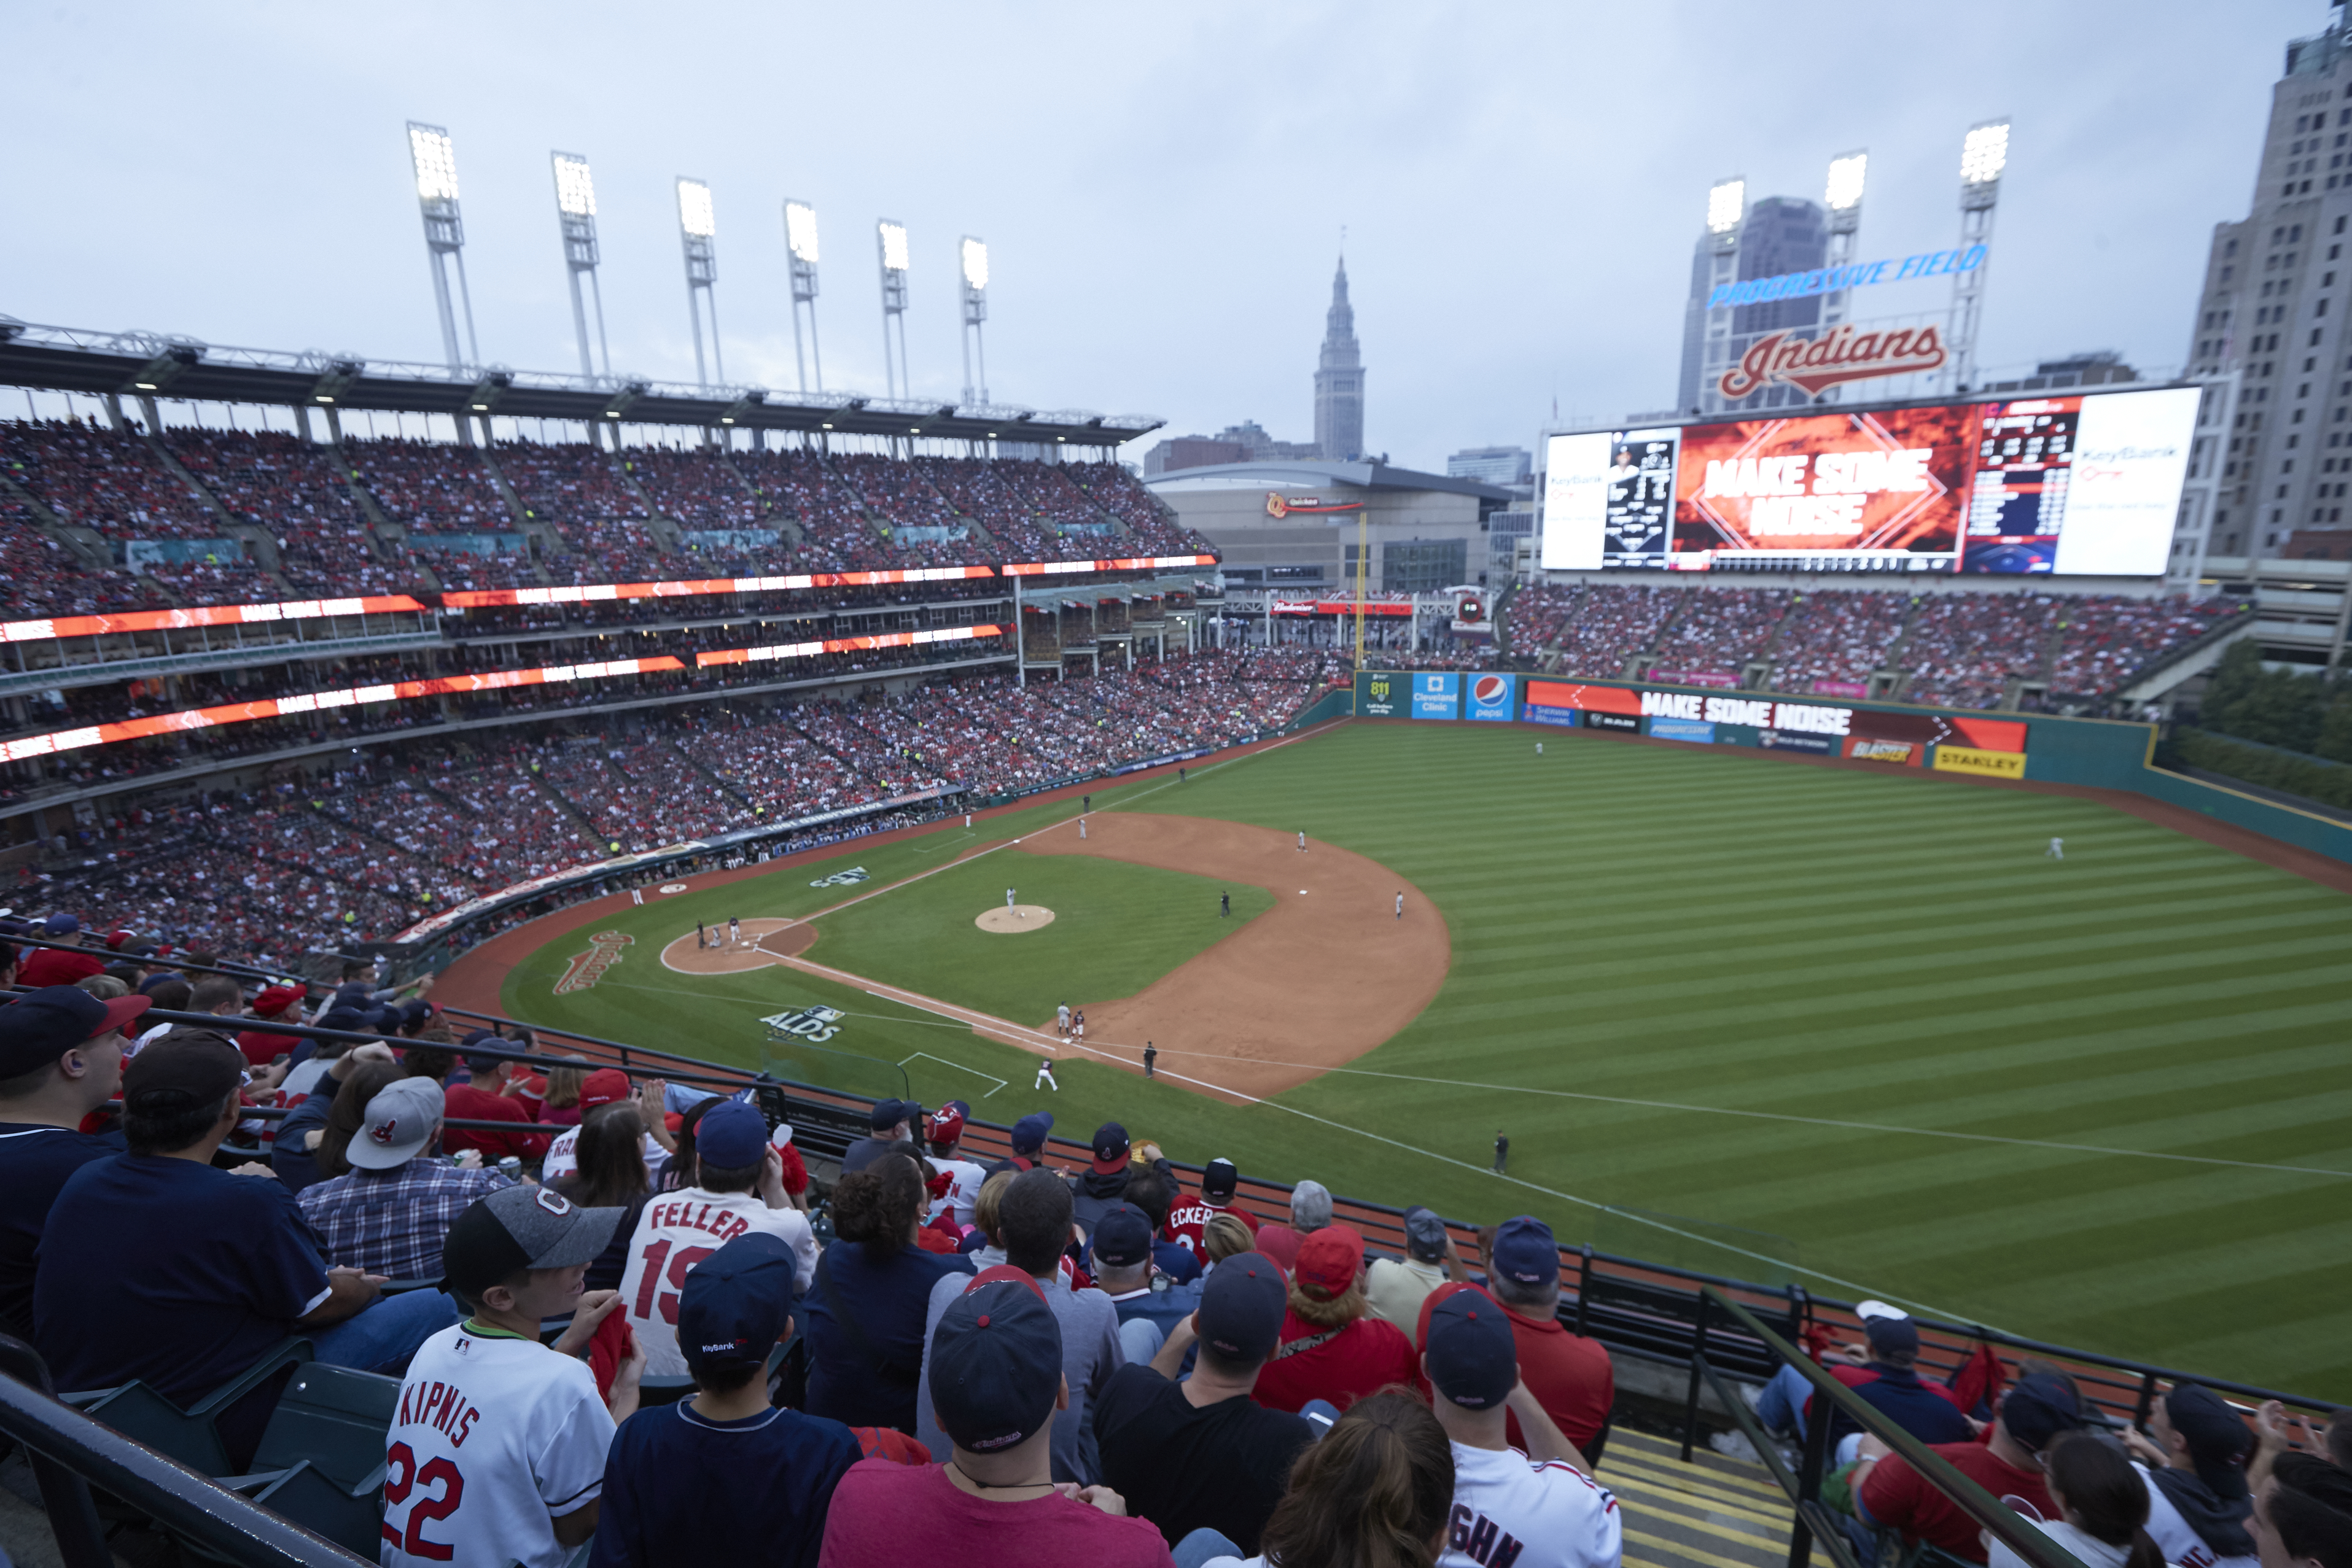 Cleveland Indians vs New York Yankees, 2017 American League Division Series